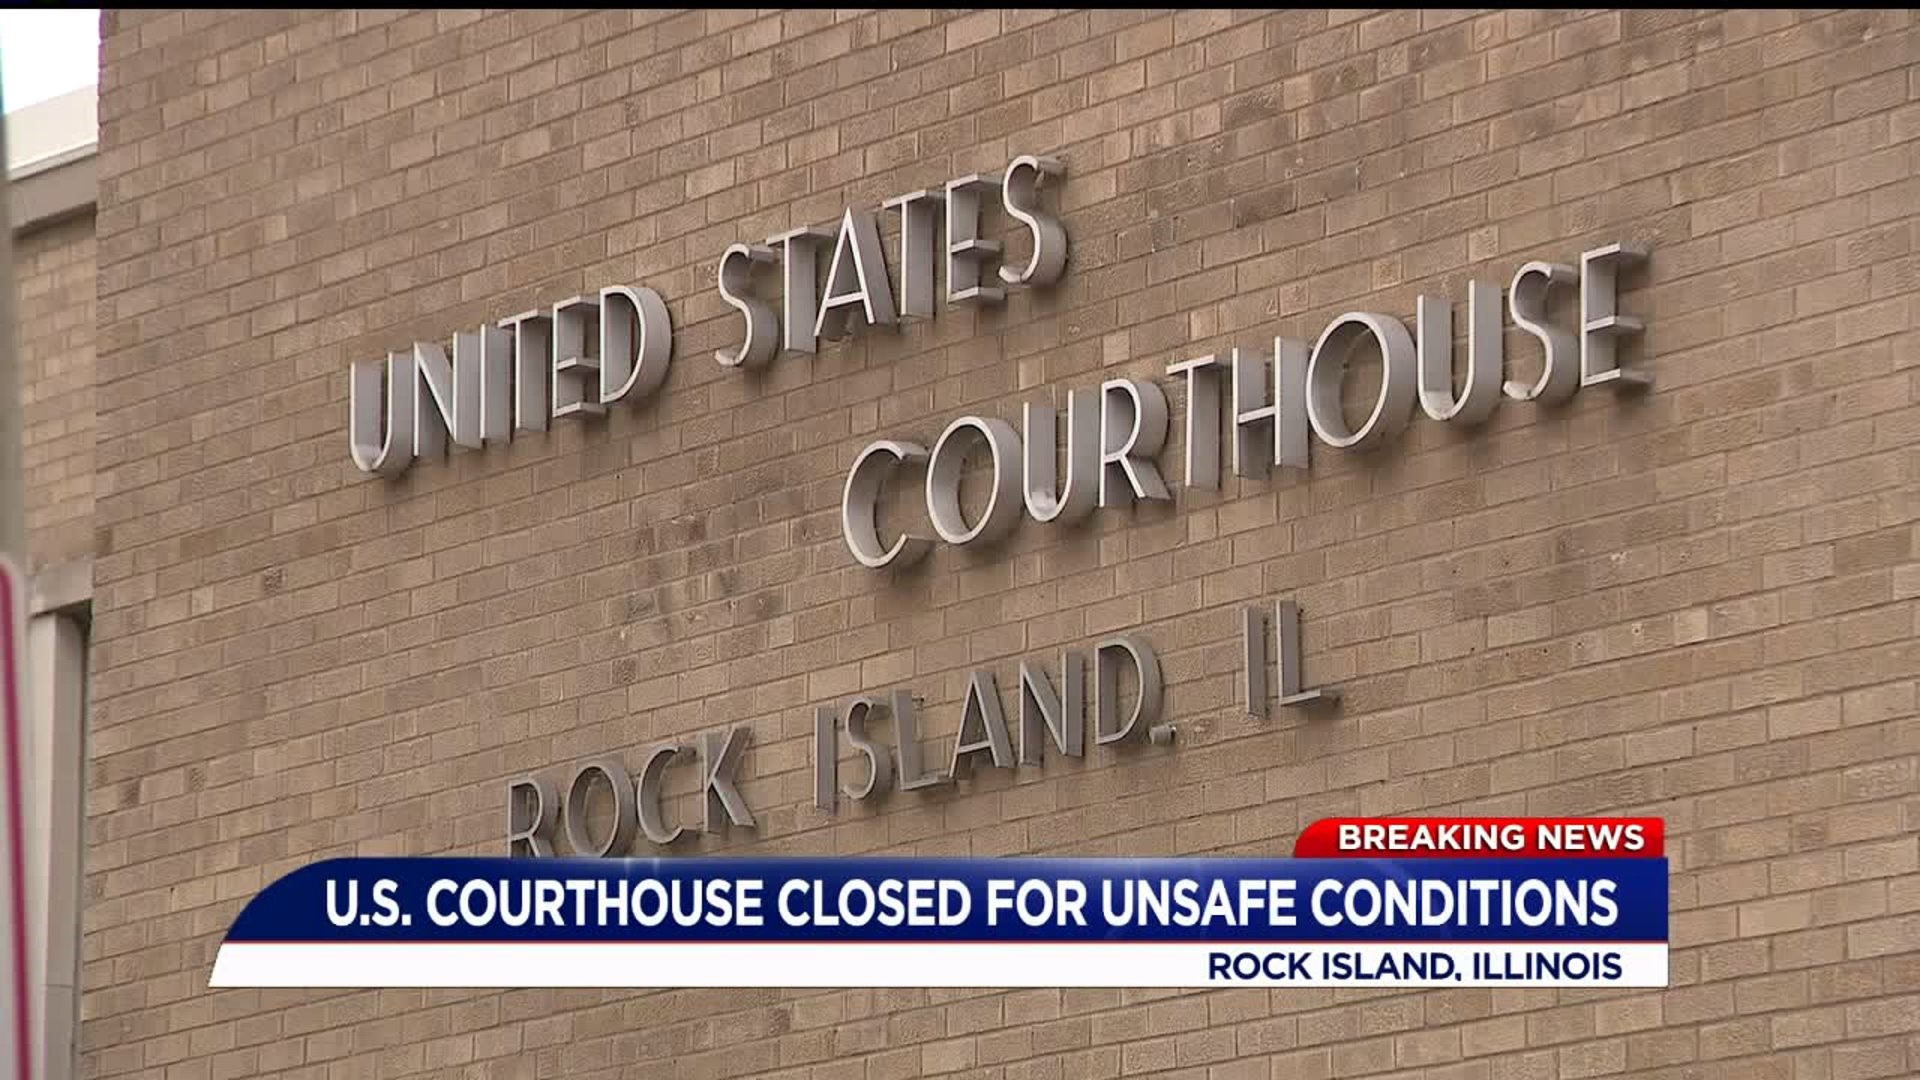 Courthouse closed for unsafe conditions